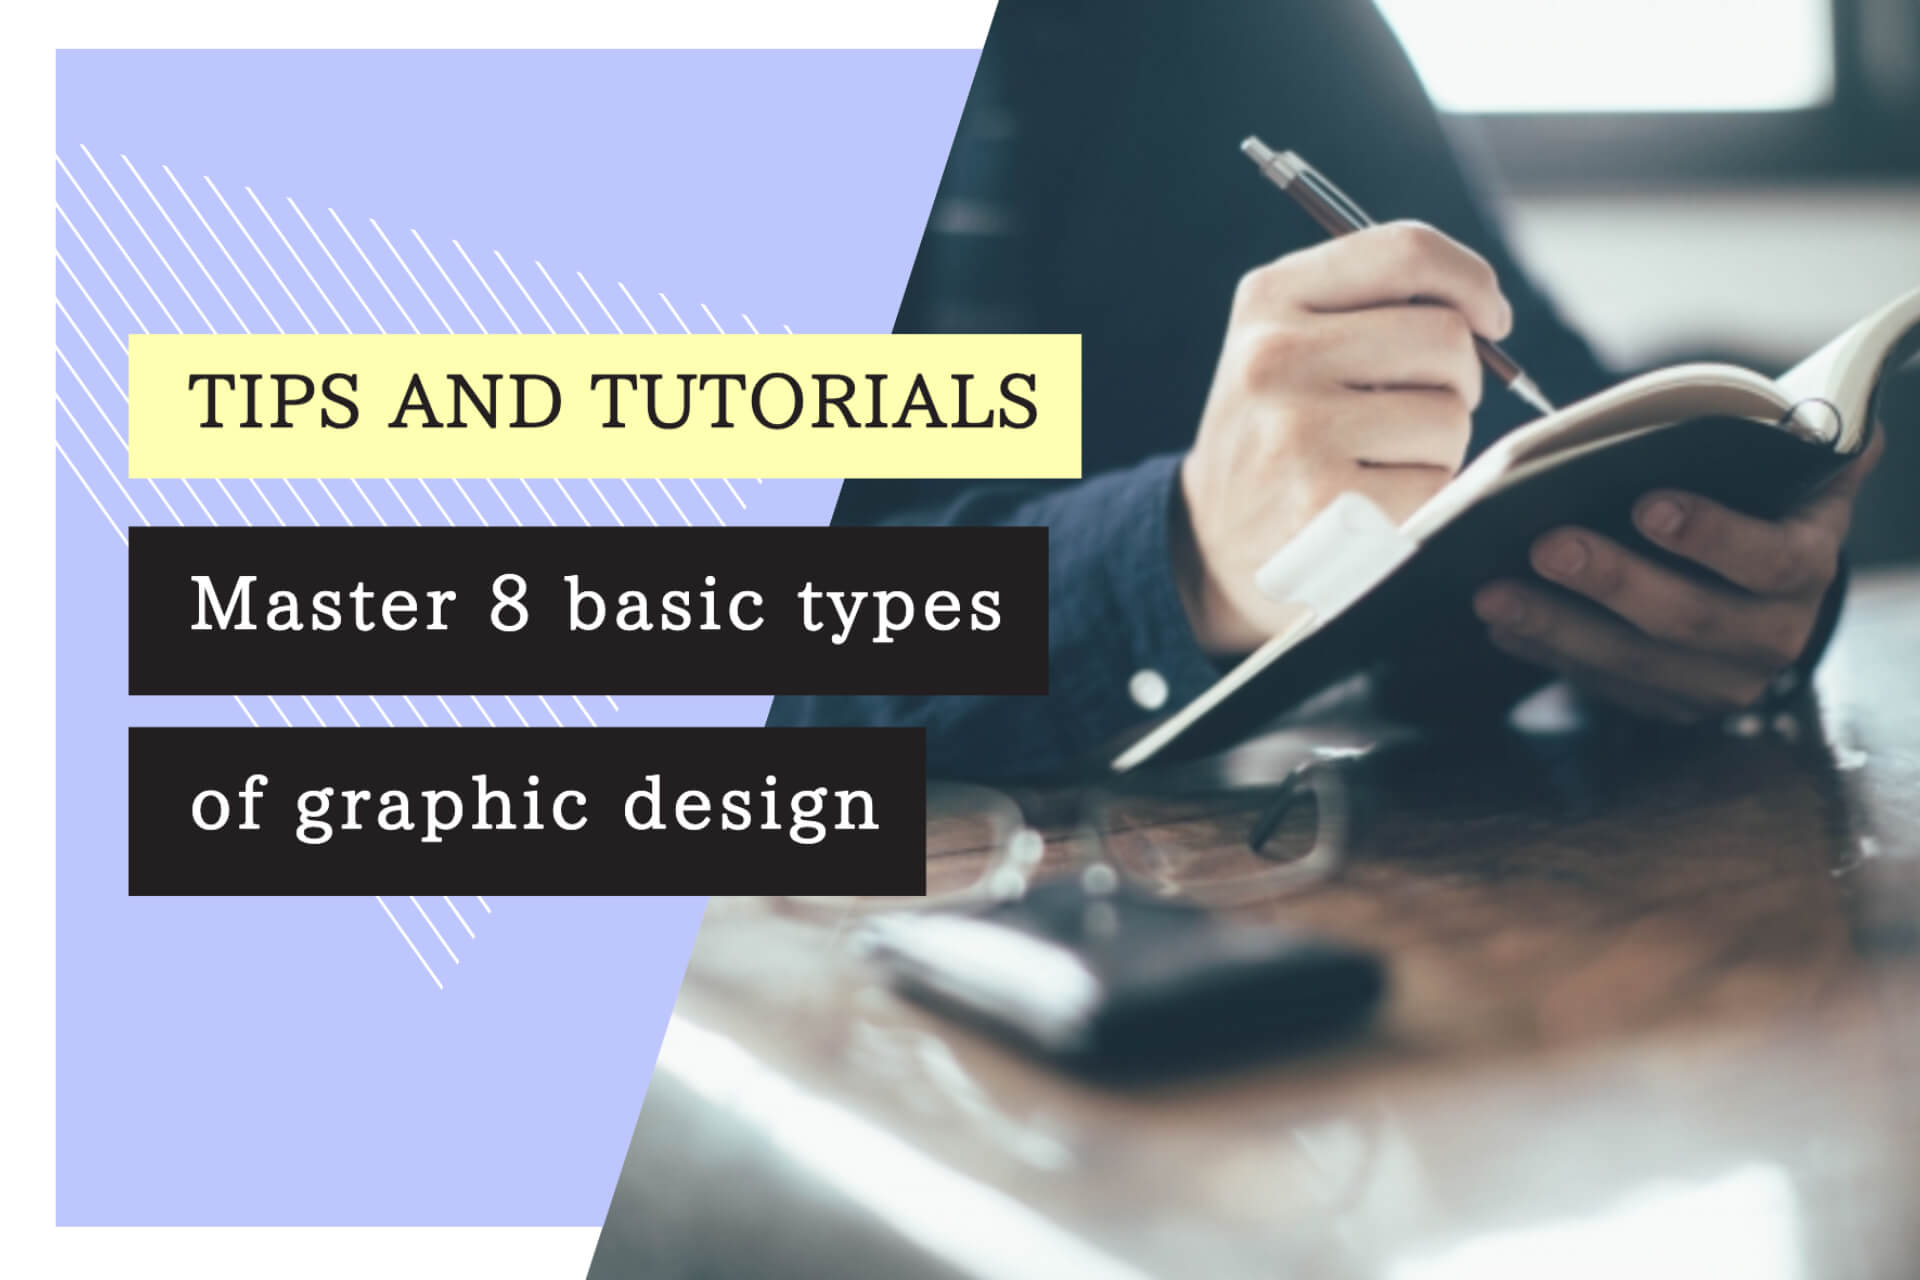 Master 8 basic types of graphic design in 10 minutes